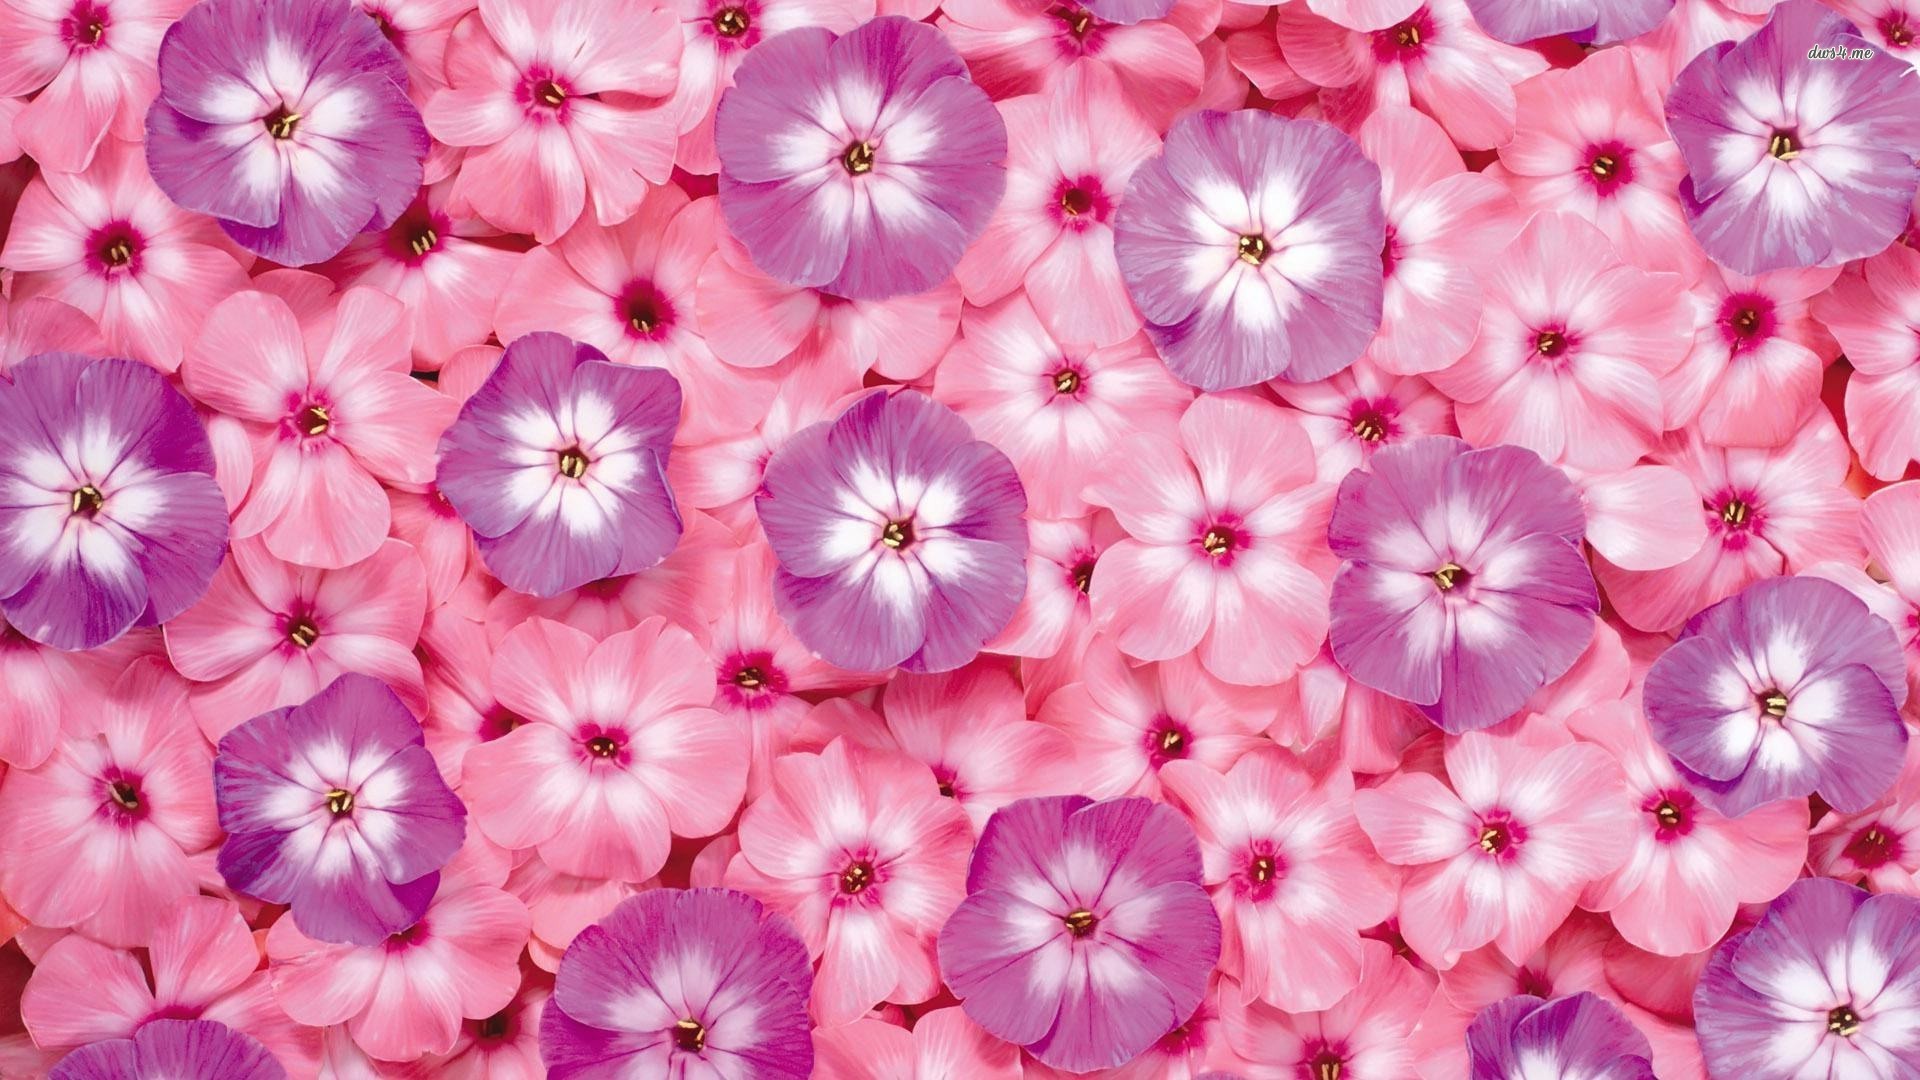 Small pink and purple flowers wallpaper   861548